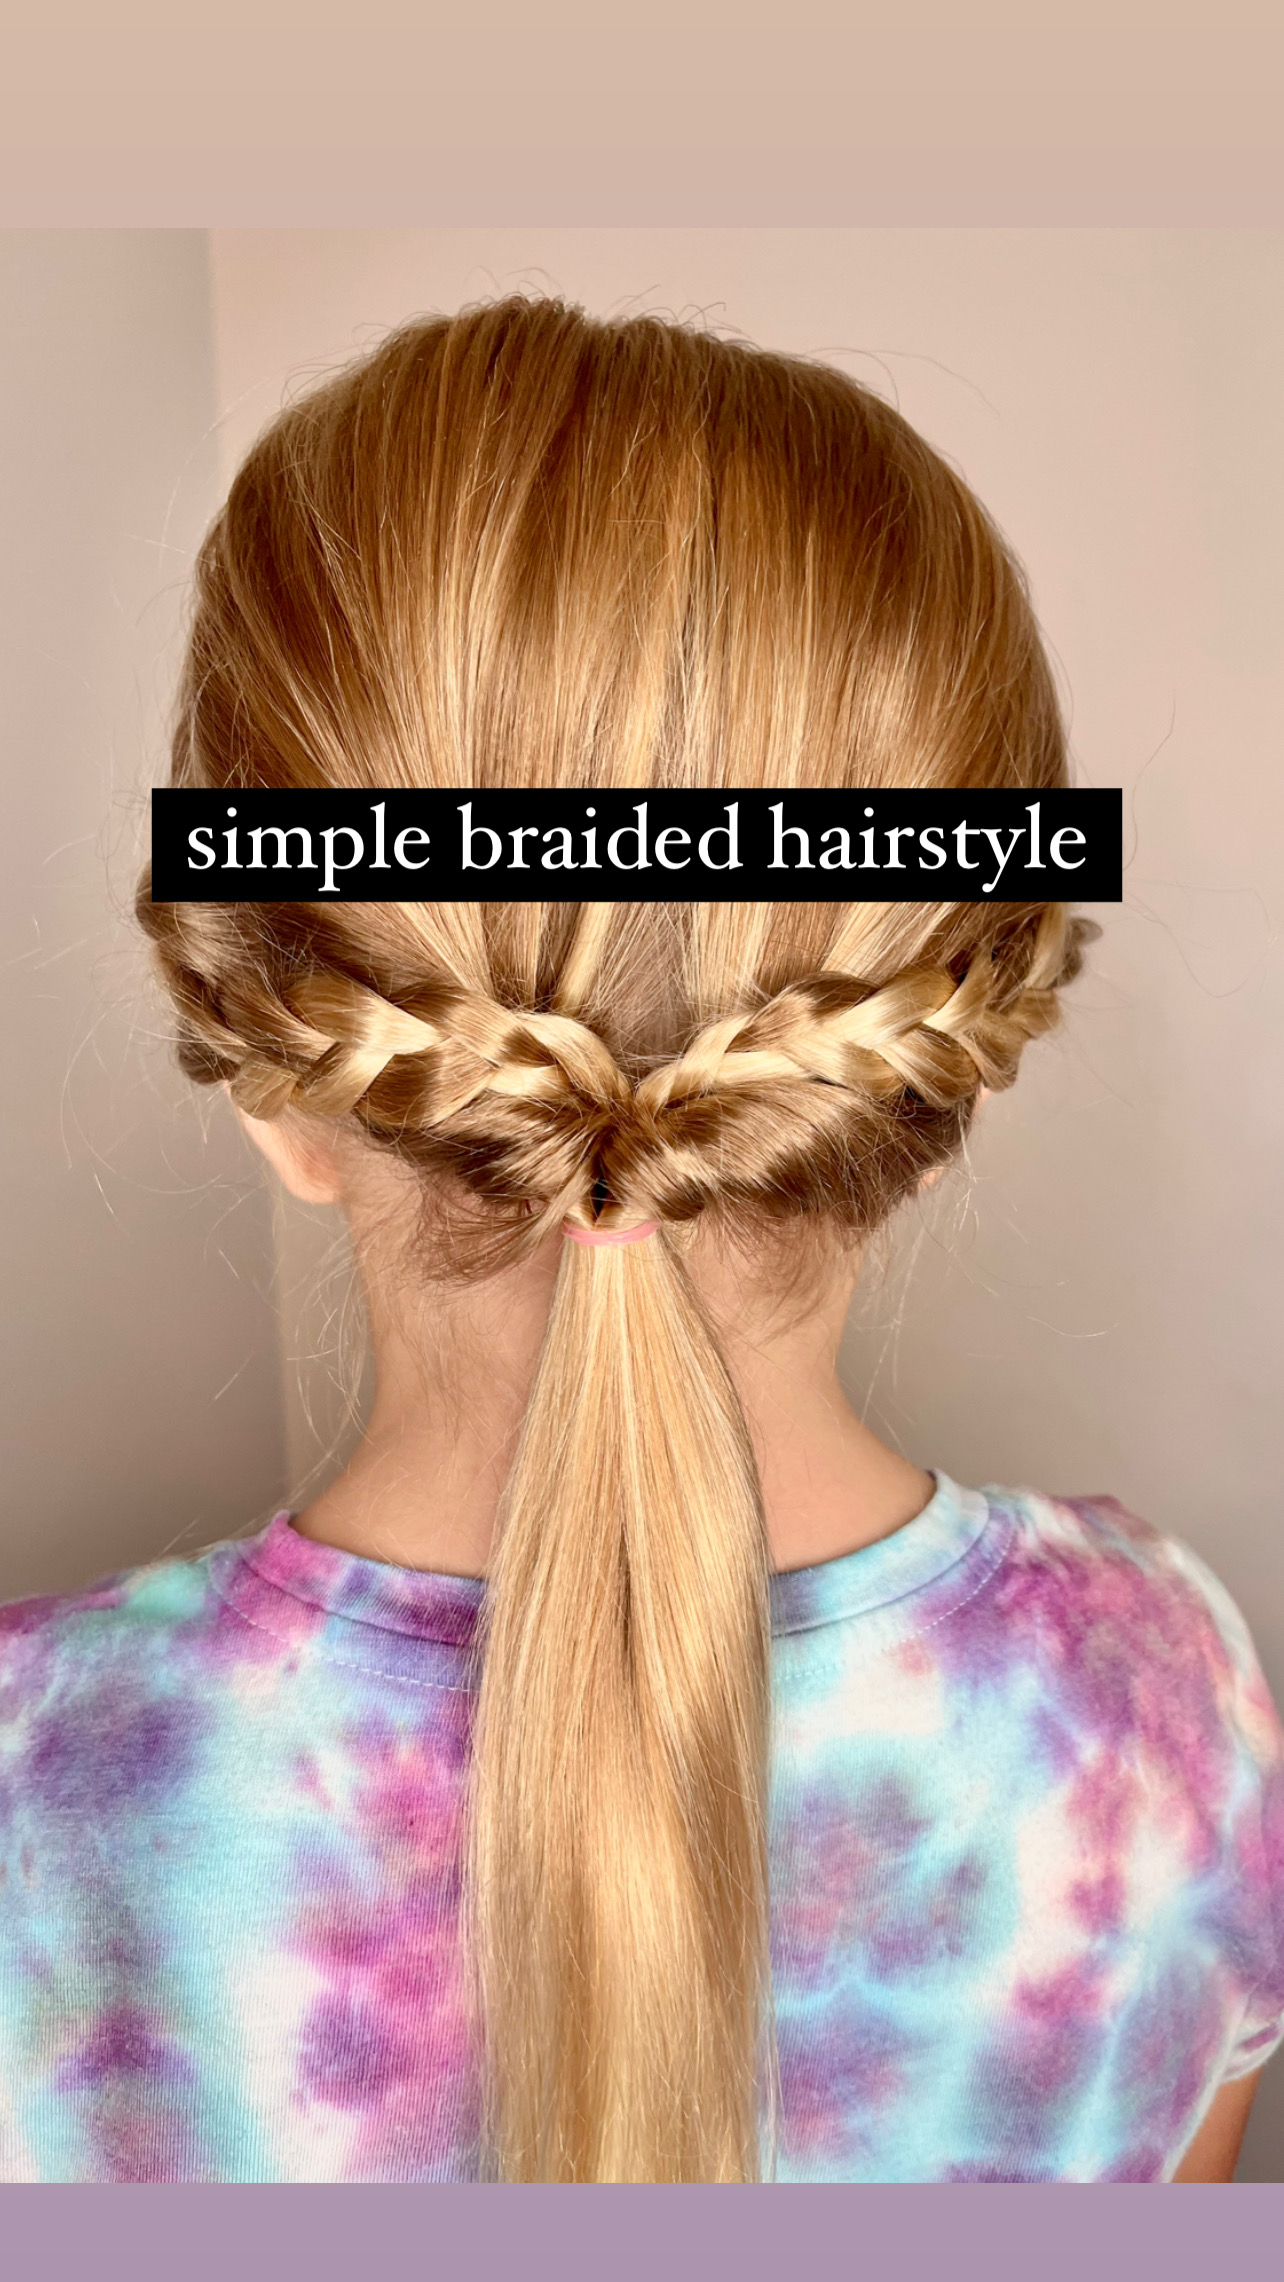 Easy Braids for Beginners: 7 Styles You Can Do in Minutes - Stylish ...